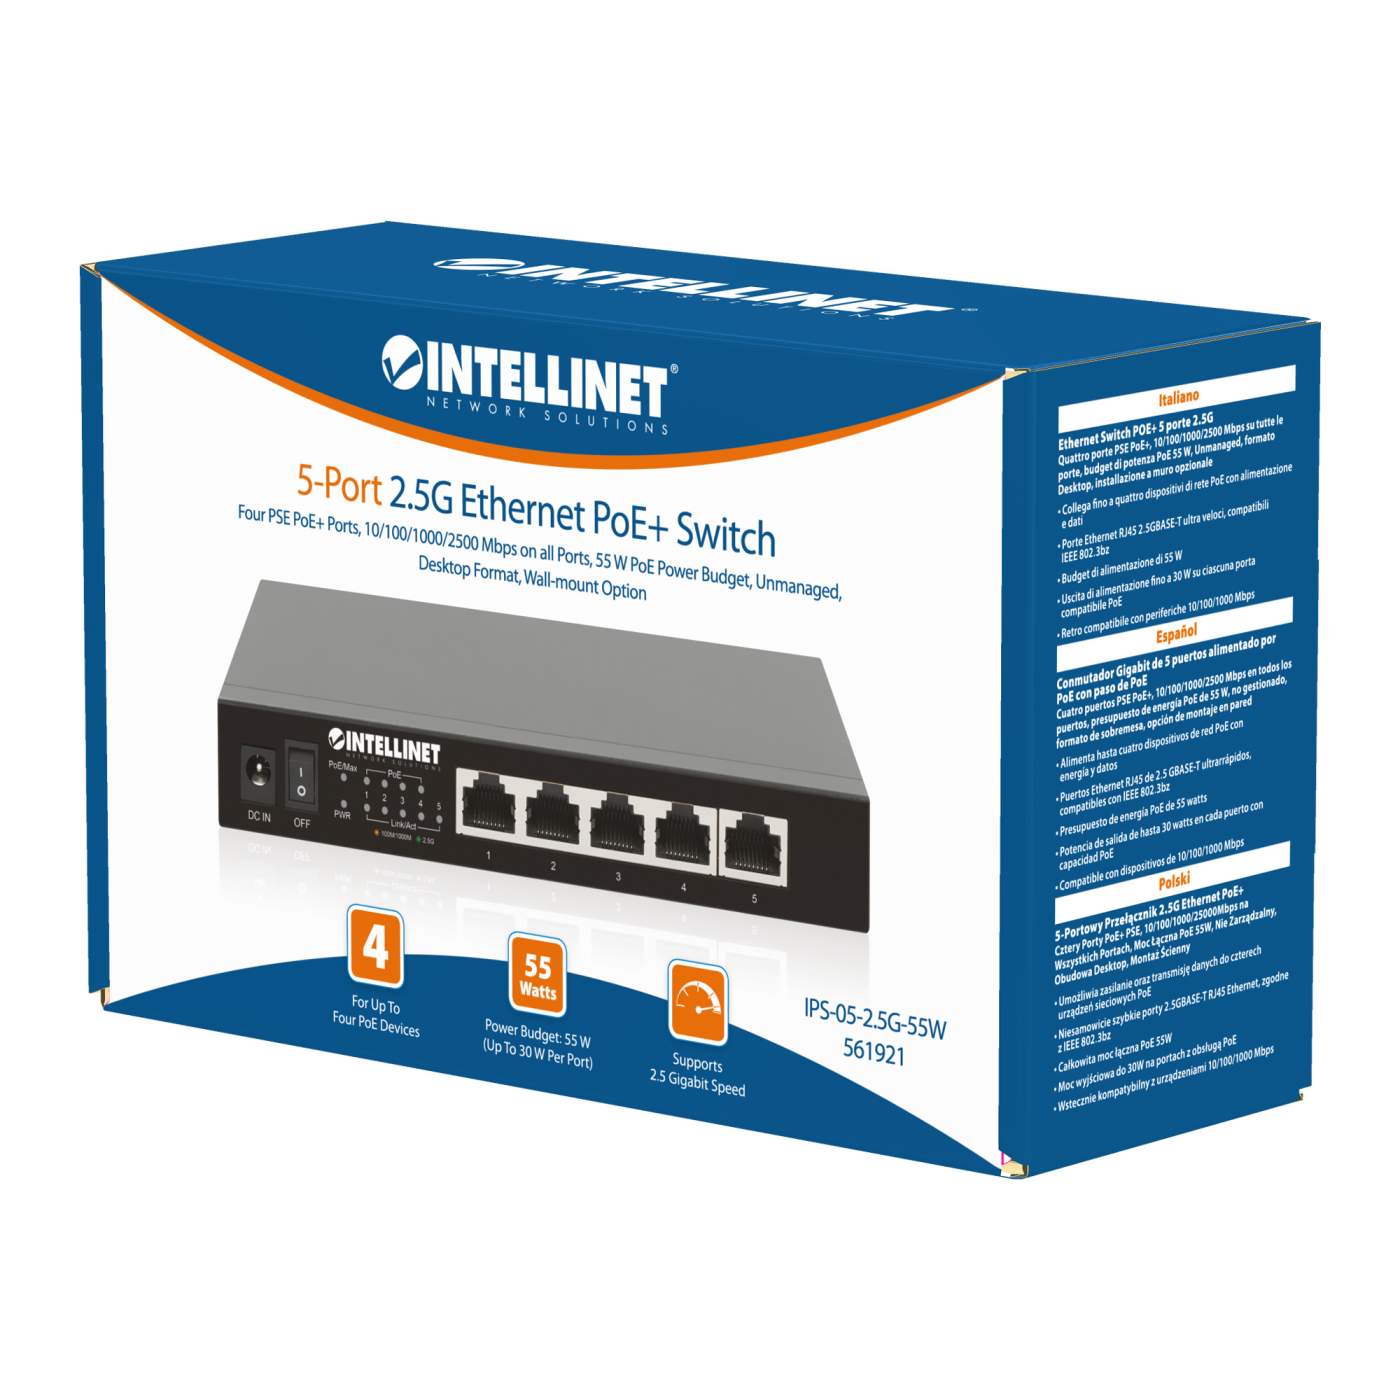 5-Port 2.5G Ethernet PoE+ Switch Packaging Image 2